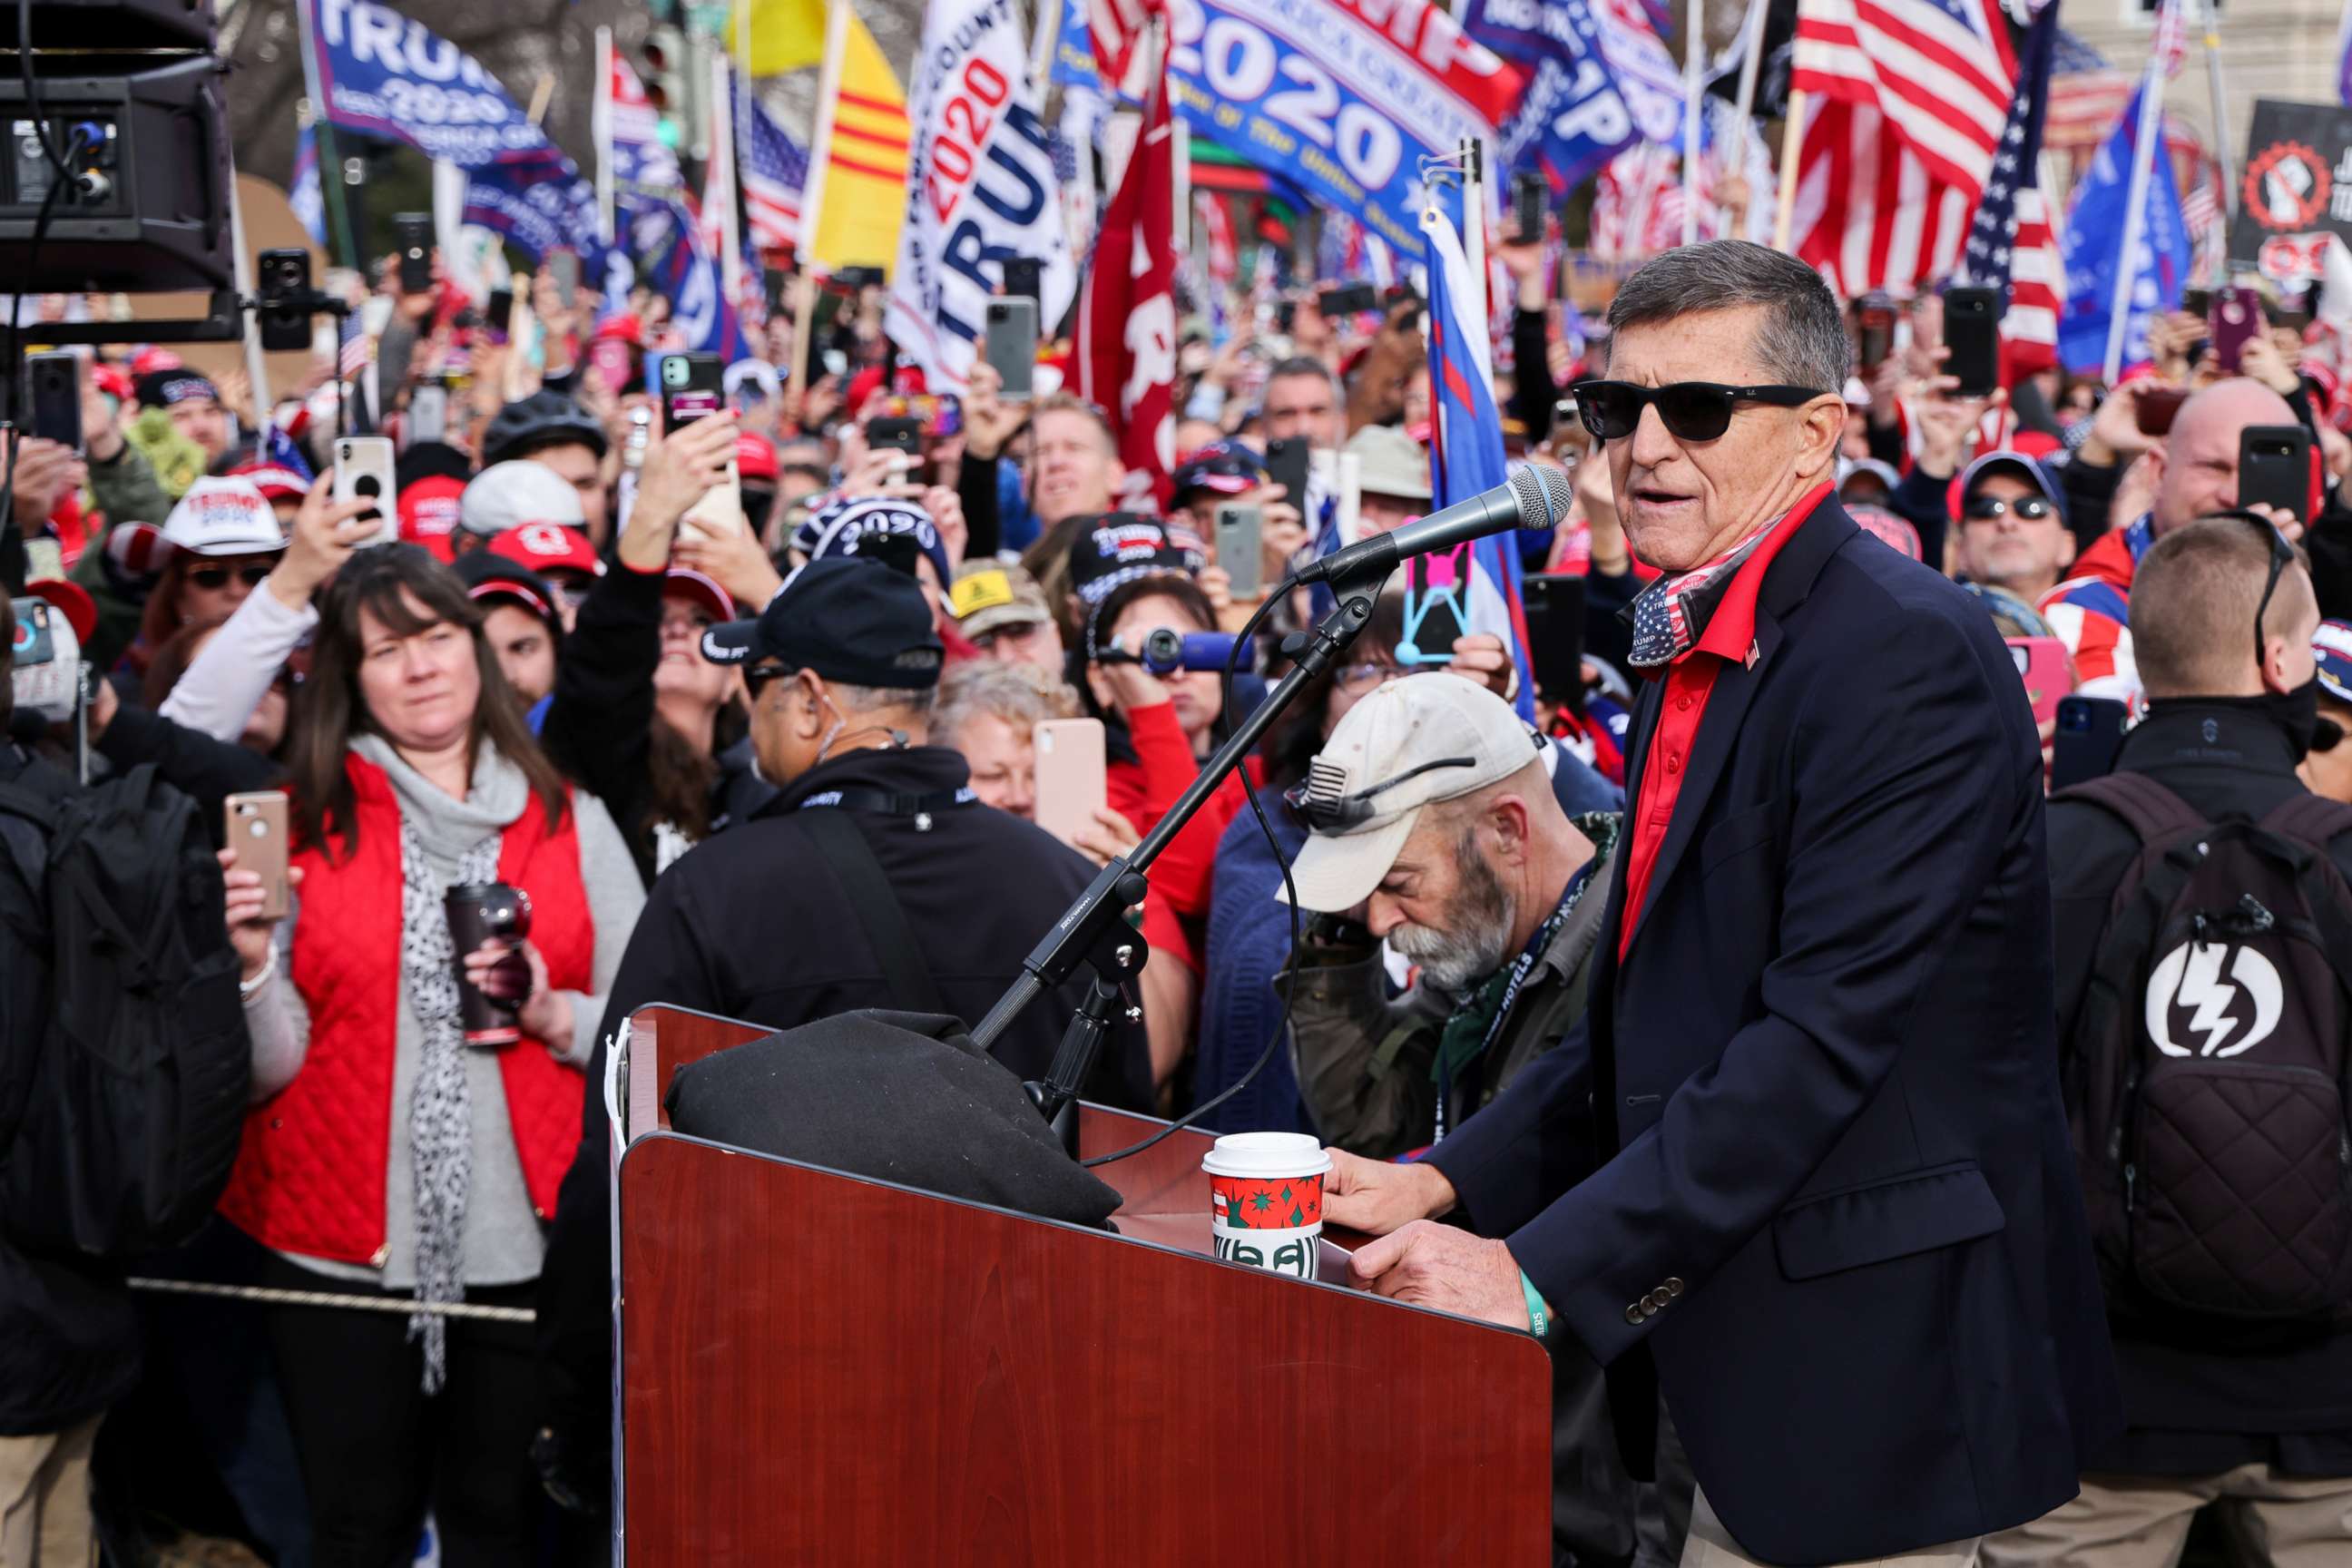 PHOTO: Former national security adviser Michael Flynn speaks as supporters of President Donald Trump listen during a rally to protest the results of the election in front of Supreme Court building, in Washington, DC., Dec. 12, 2020.